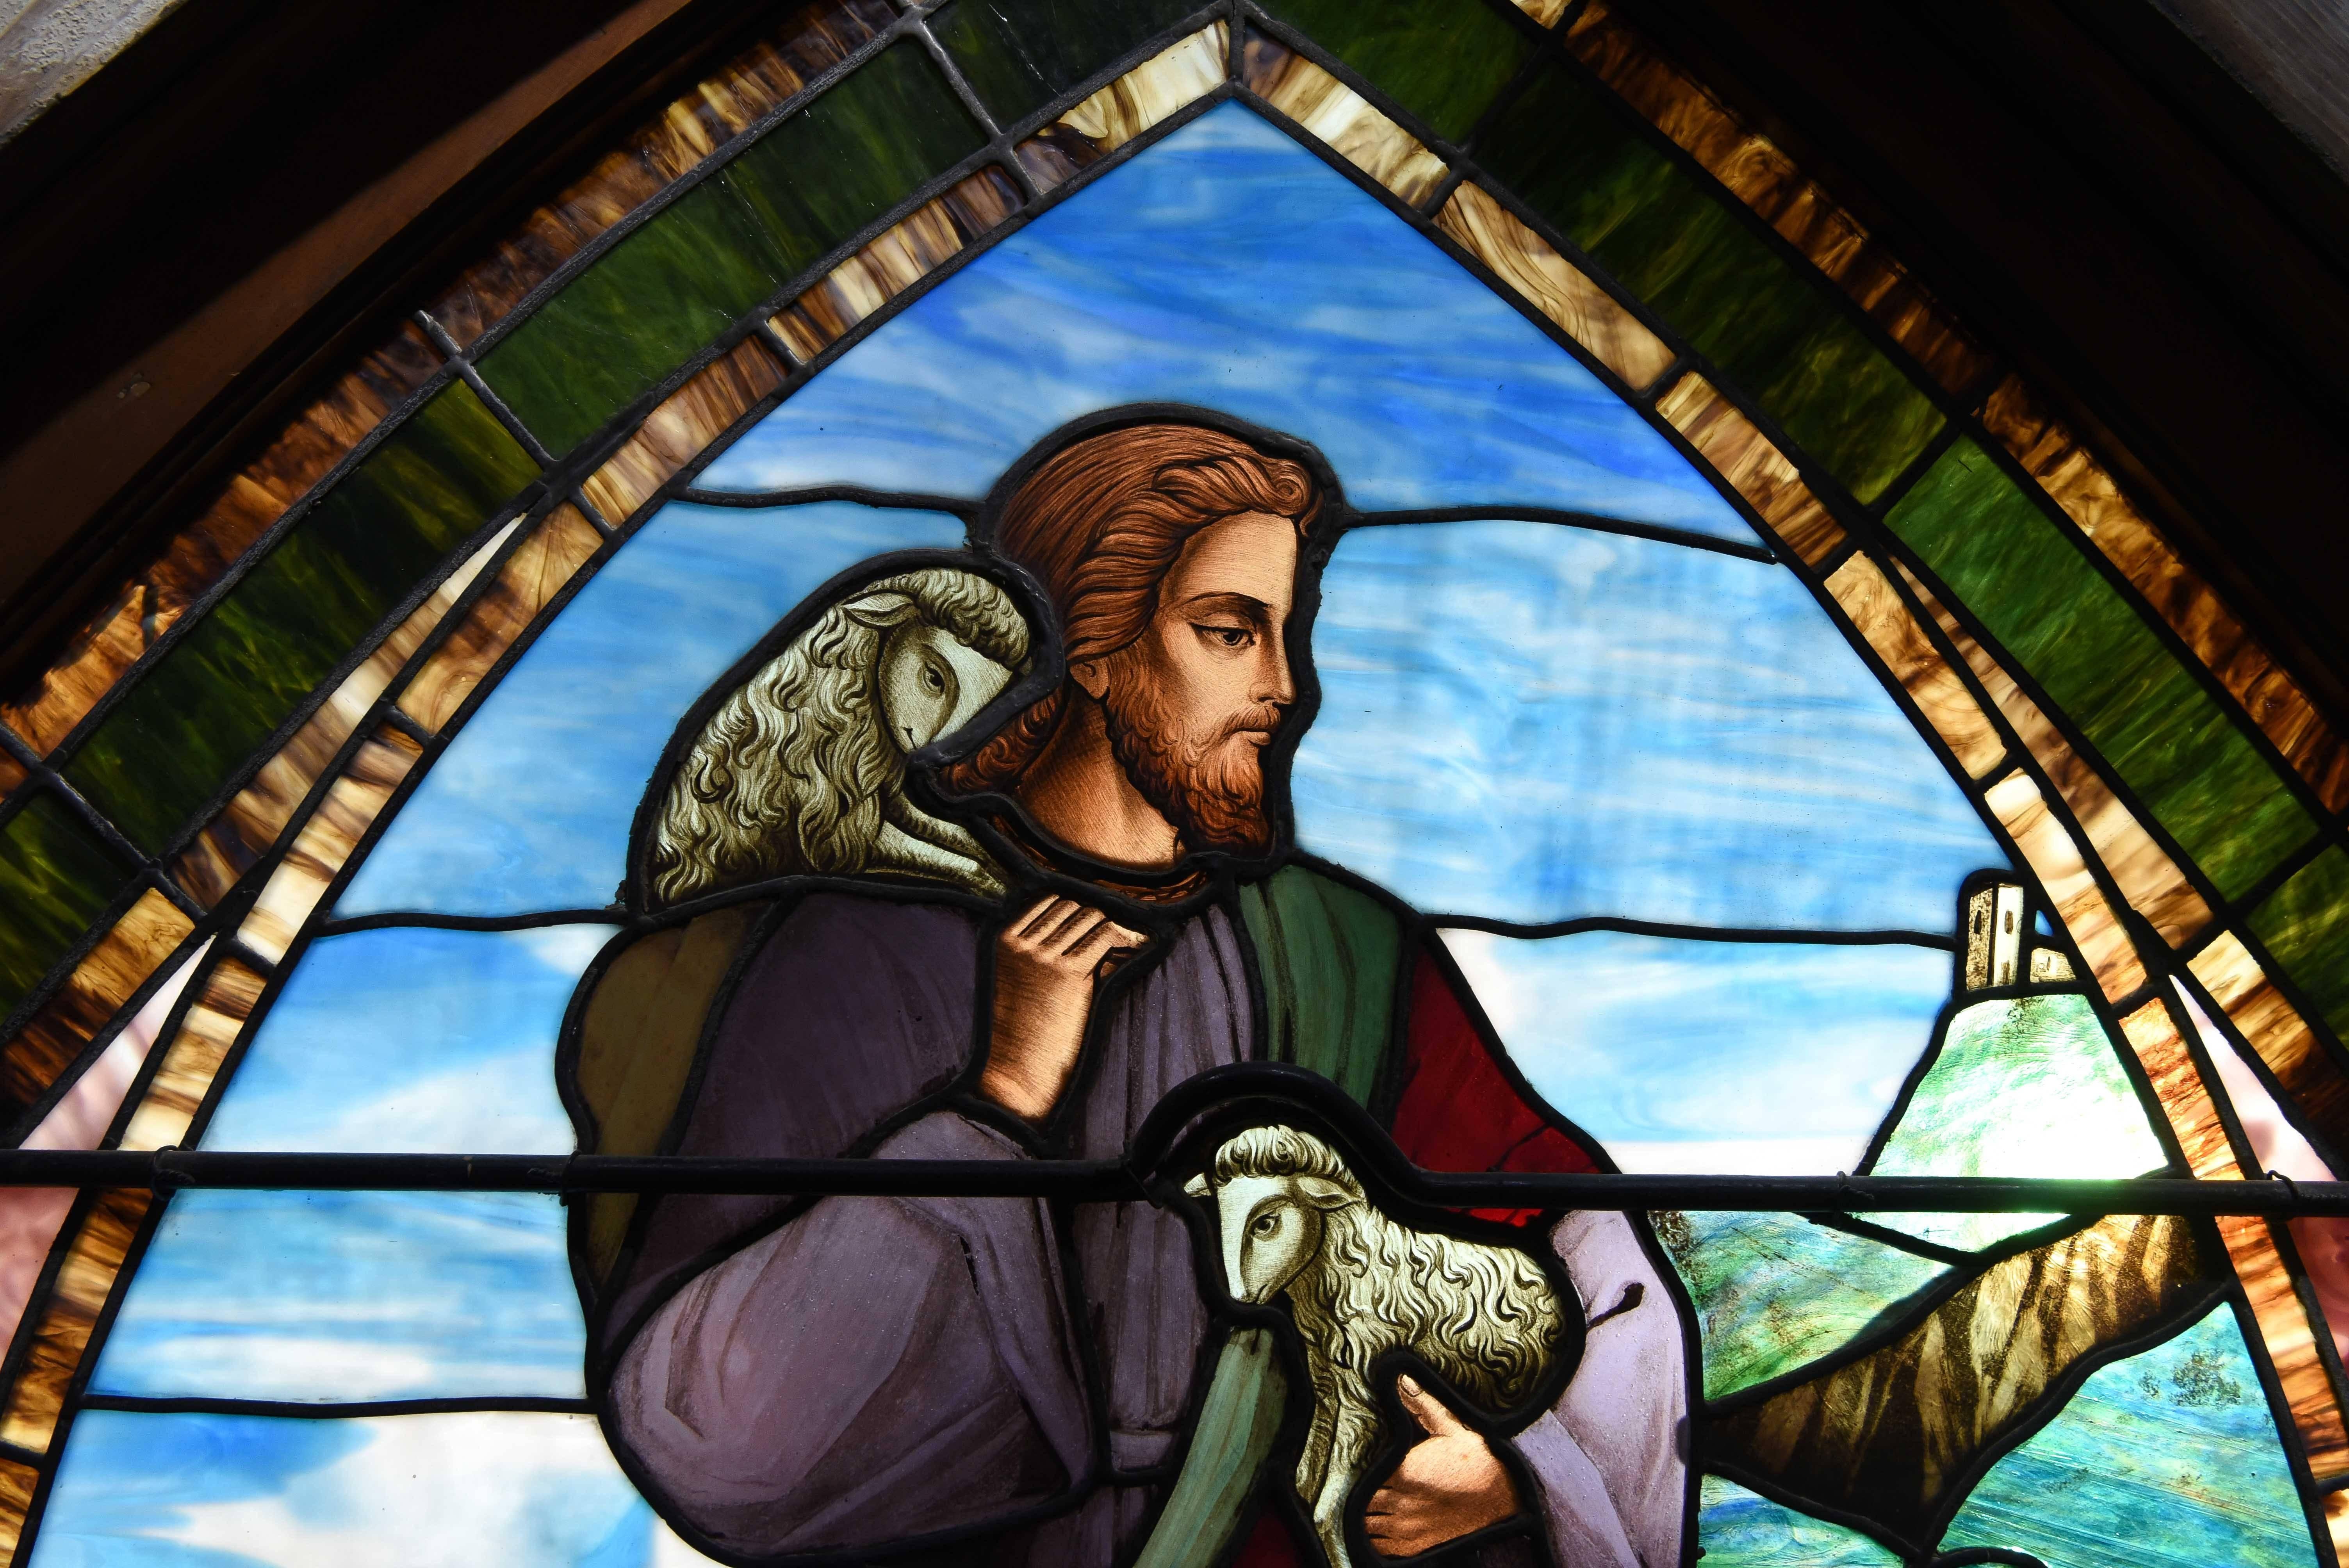 From a Maryland church. Depicts Jesus with lambs as the Good Shepherd.
Glass reads In Loving Memory of John Evans Cacy, March 1, 1860, Anna Maria Osborne his wife July 25, 1880.
Anna Maria Osborne: Born: 11 Dec 1814 MD; Died: 25 Jul 1880 ; Buried: